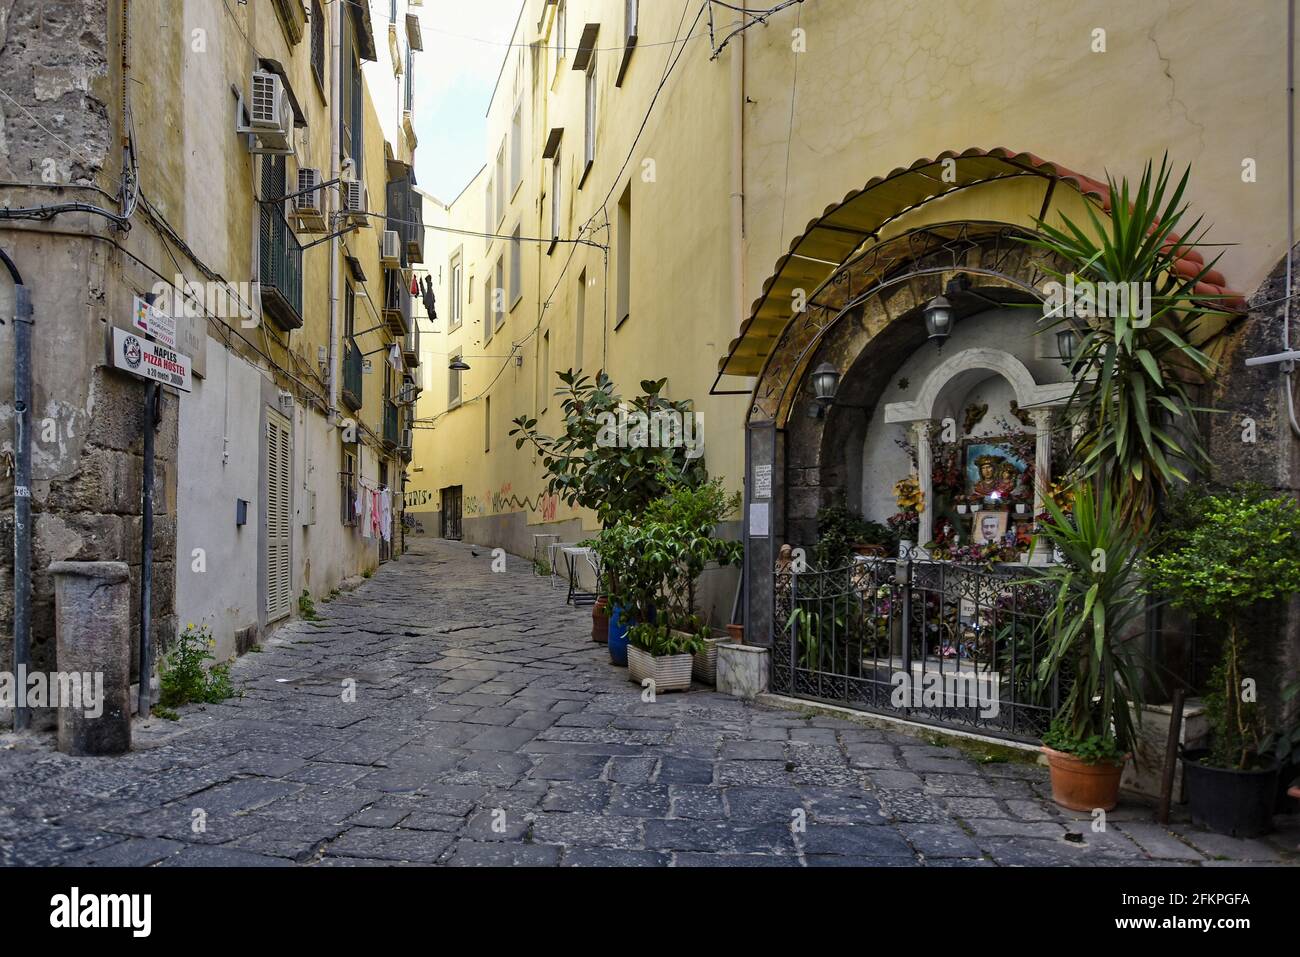 Naples, Italy, May 2, 2021. A place of prayer and religious devotion in a street of the medieval quarter. Stock Photo